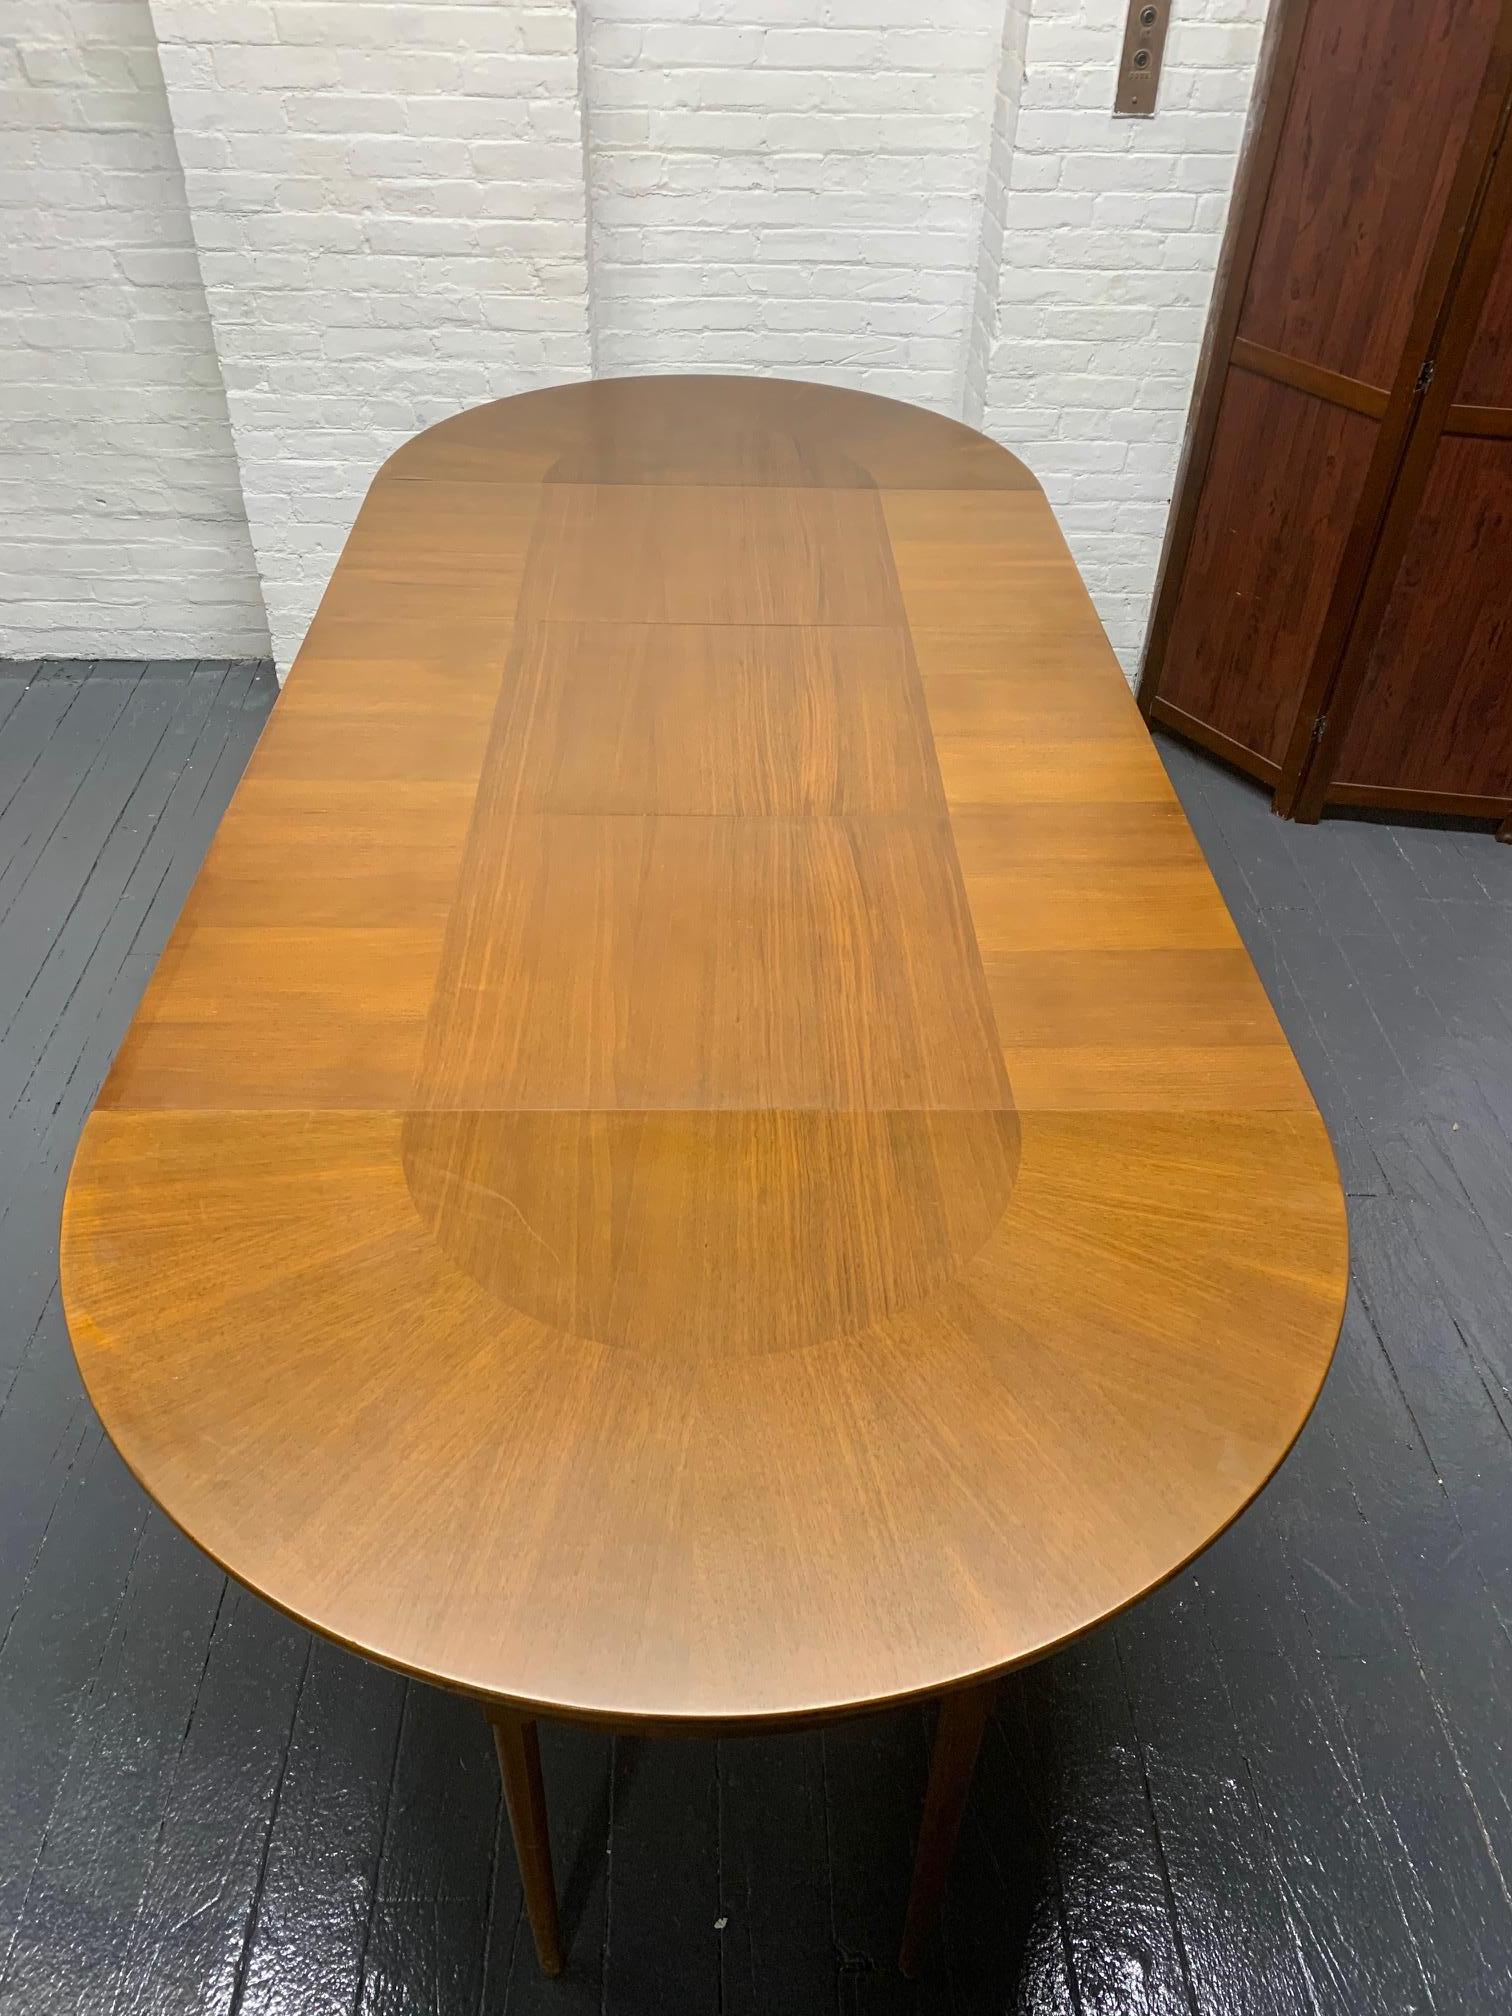 Mid-20th Century Mid-Century Modern Dining Table with Three Extension Leaves